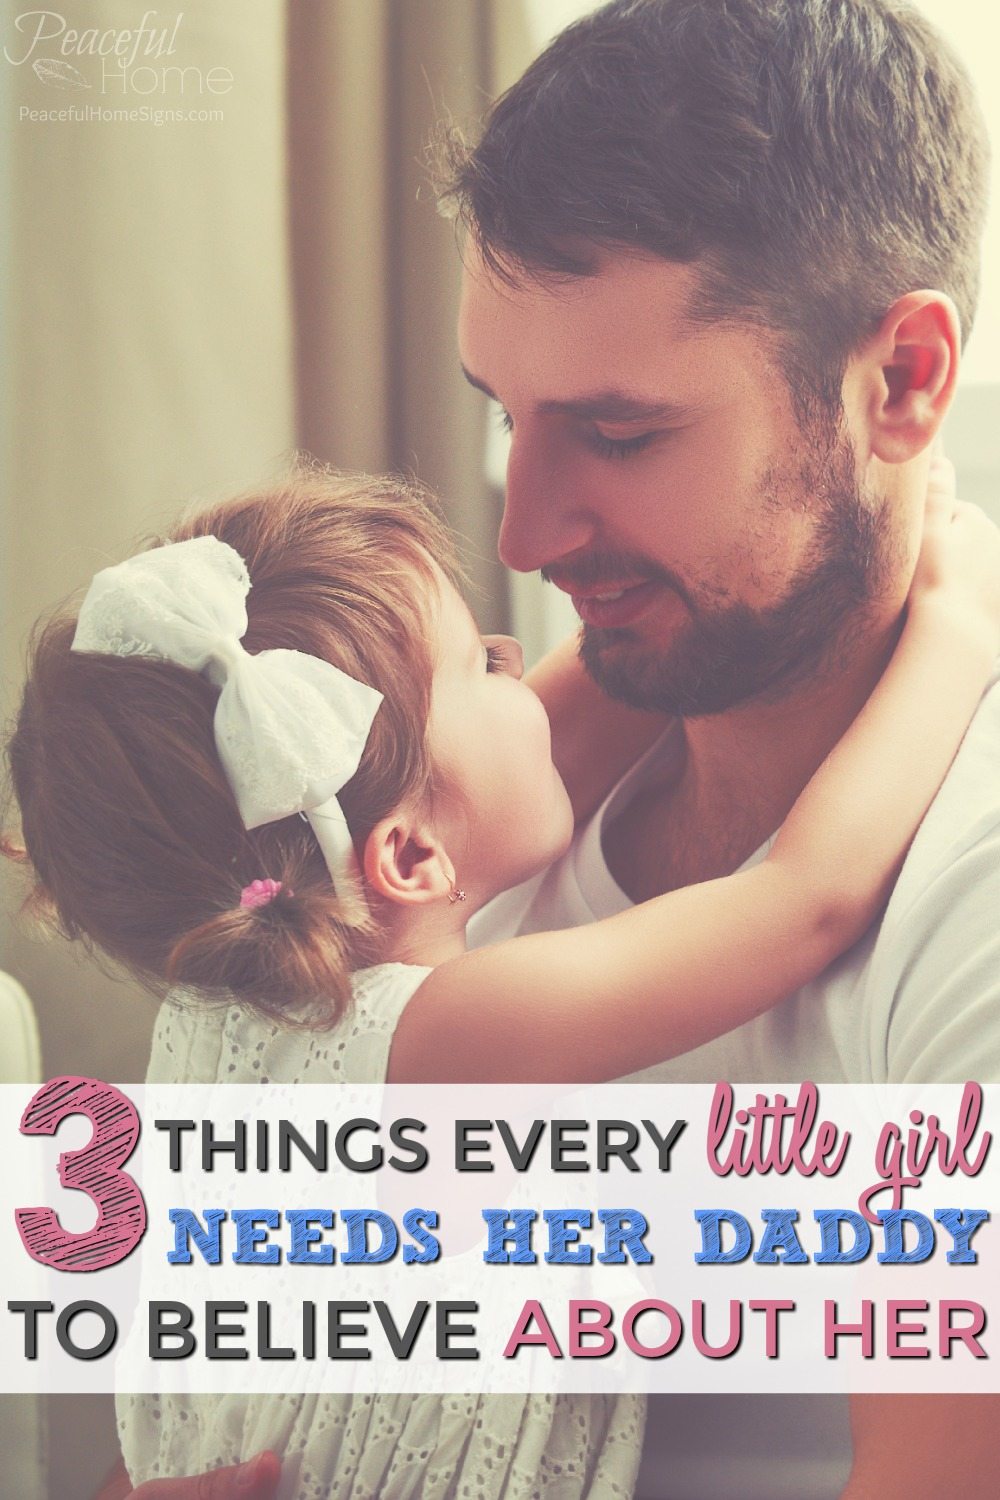 Advice to Dads | Christian Dads | Teaching Your Daughter Purity | What A Daughter Needs | How to connect with your daughter | Christian Dad Advice | Christian Mom Blog | 3 things every little girl needs her daddy to believe about her